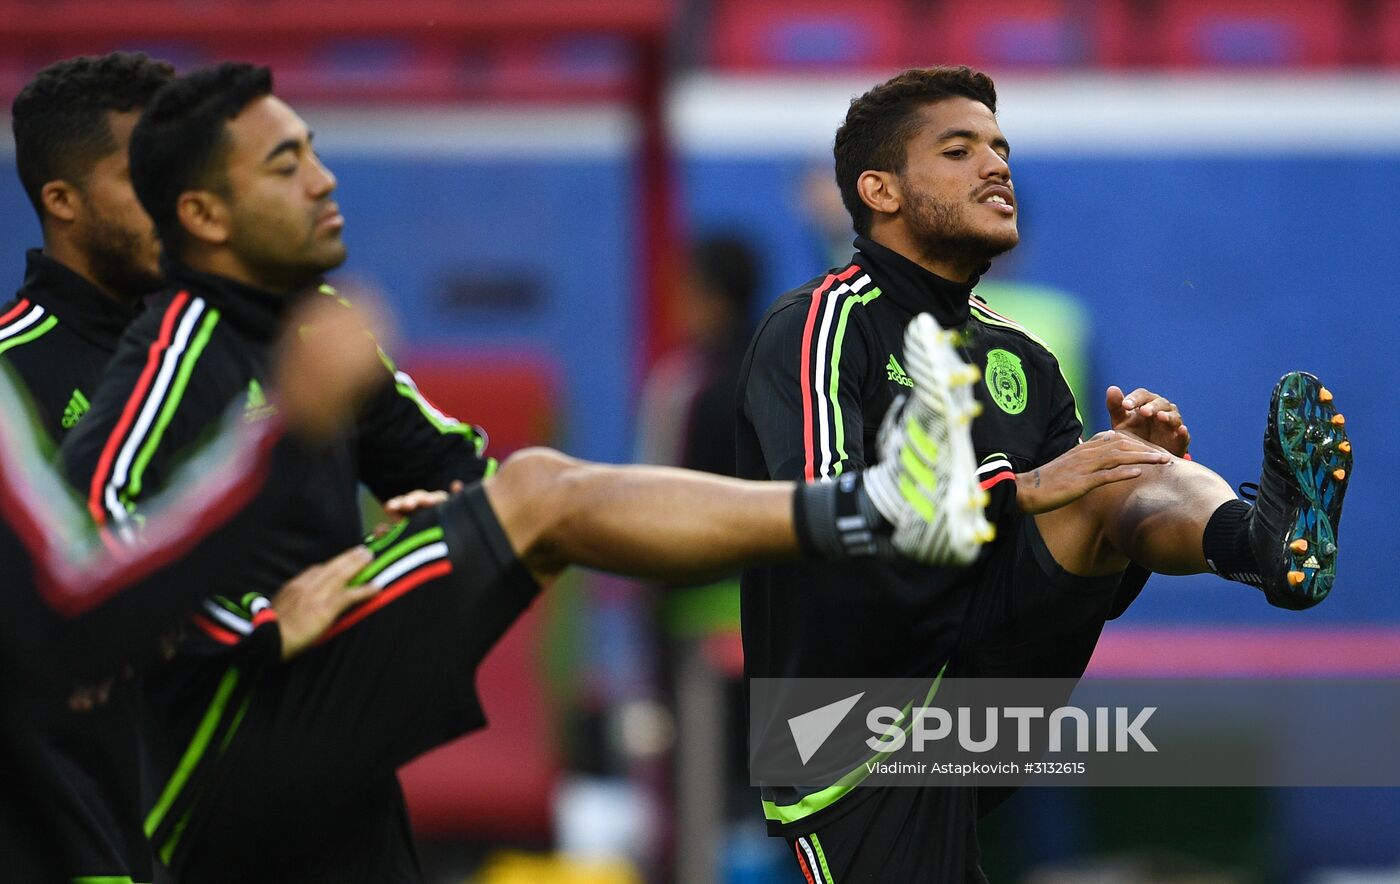 Football. 2017 FIFA Confederations Cup. Training session of Mexico’s national team